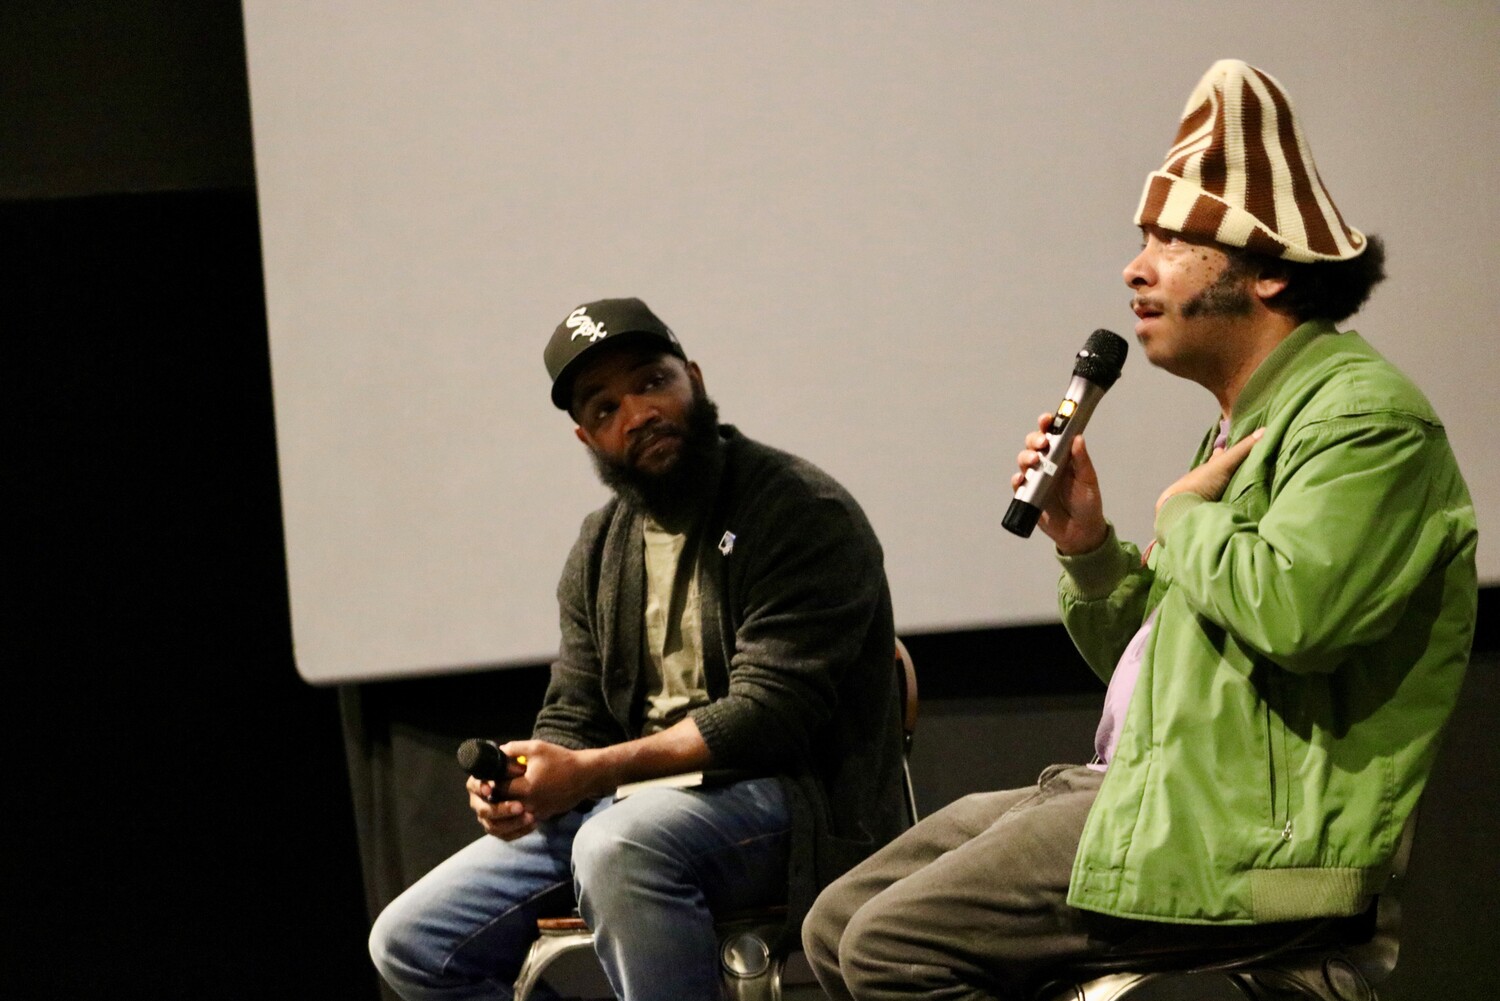 A.D. Carson & Boots Riley on stage after the screening of I'm a Virgo.